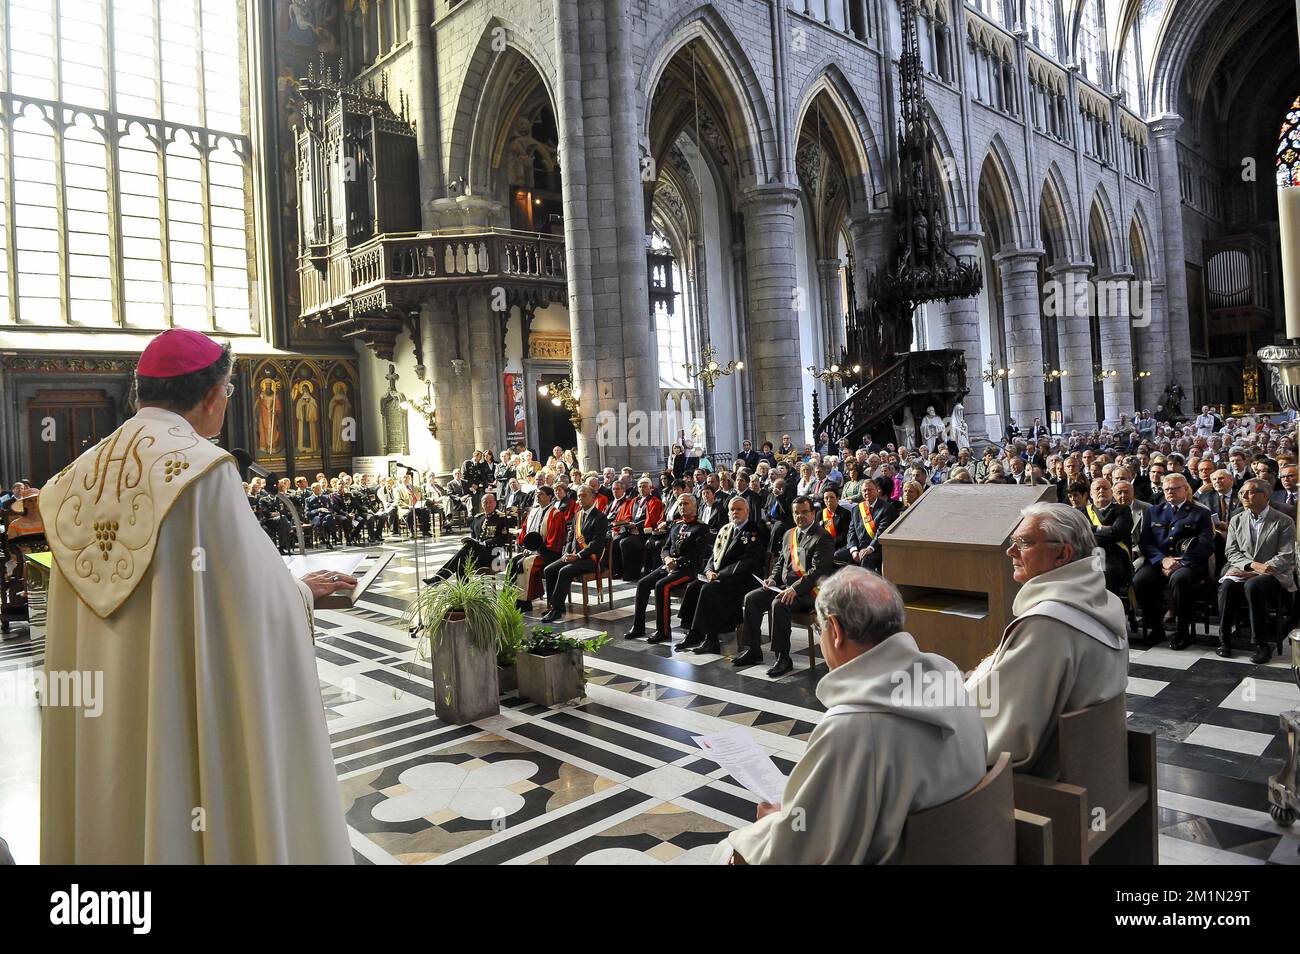 20120721 - LIEGE, BELGIUM: Illustration picture shows the Te Deum mass, on the occasion of today's Belgian National Day, at the Cathedrale Saint-Paul (Sint-Pauluskathedraal) cathedral, Saturday 21 July 2012 in Liege. BELGA PHOTO NICOLAS LAMBERT Stock Photo